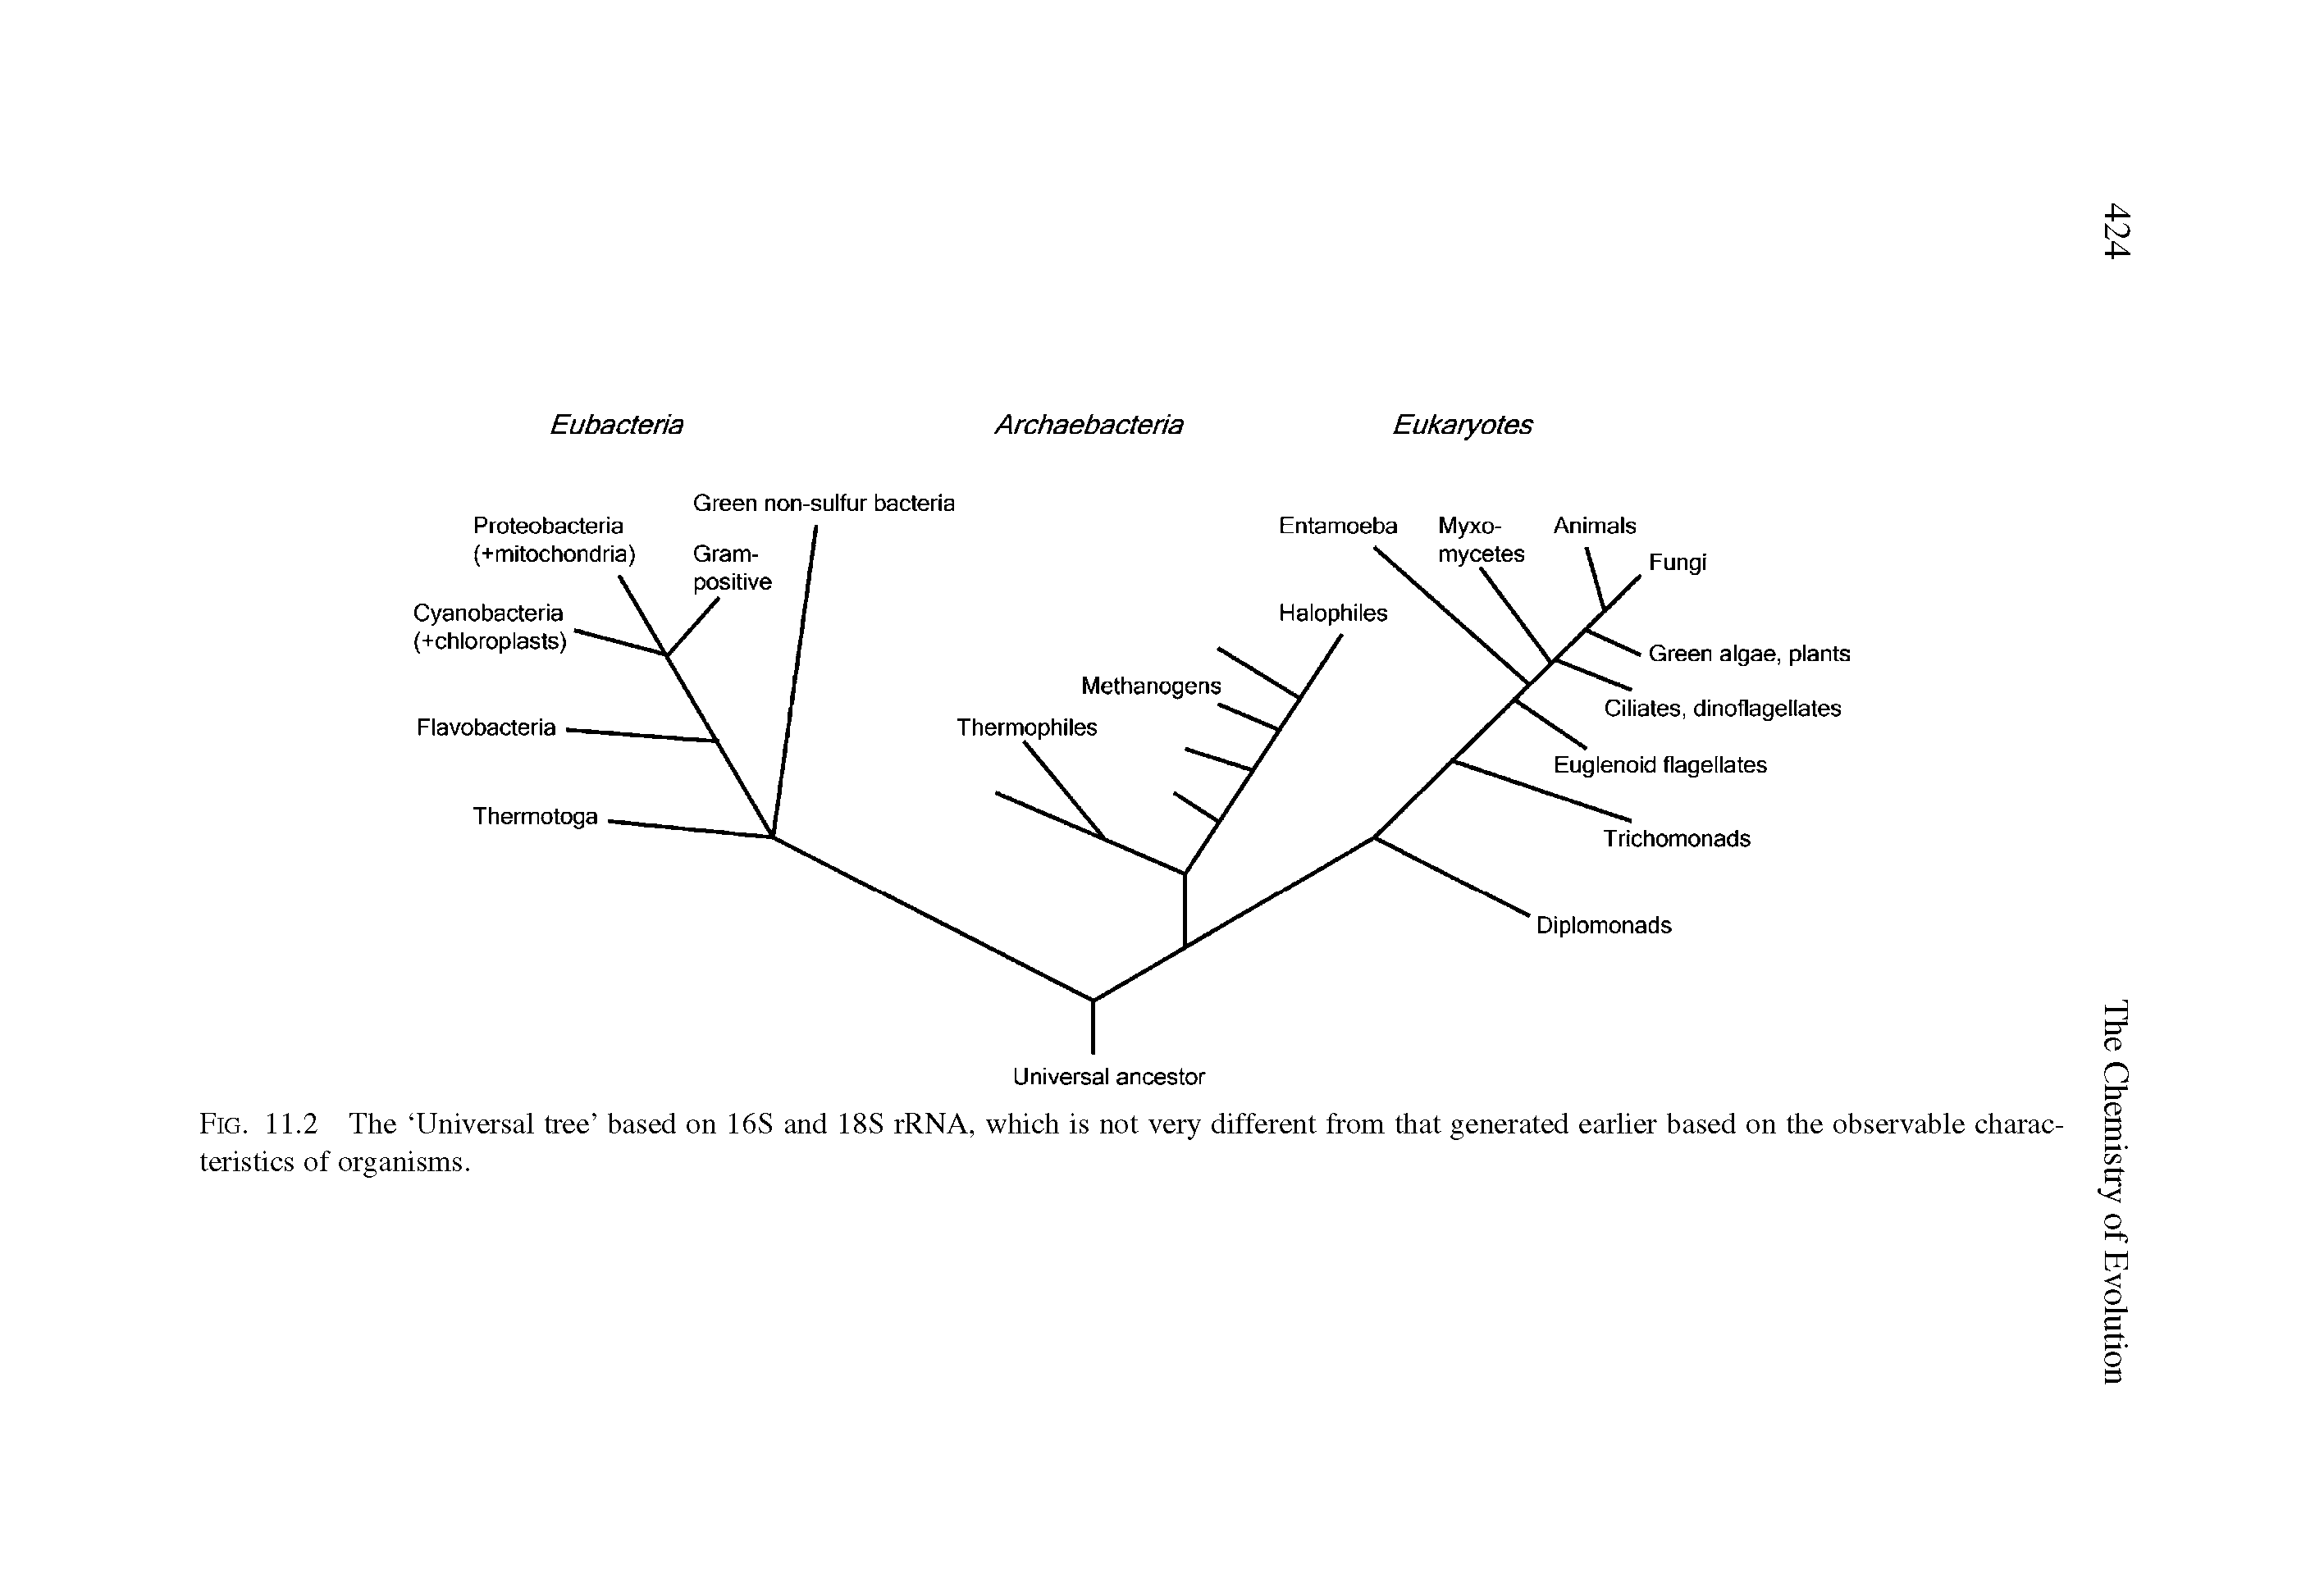 Fig. 11.2 The Universal tree based on 16S and 18S rRNA, which is not very different from that generated earlier based on the observable characteristics of organisms.